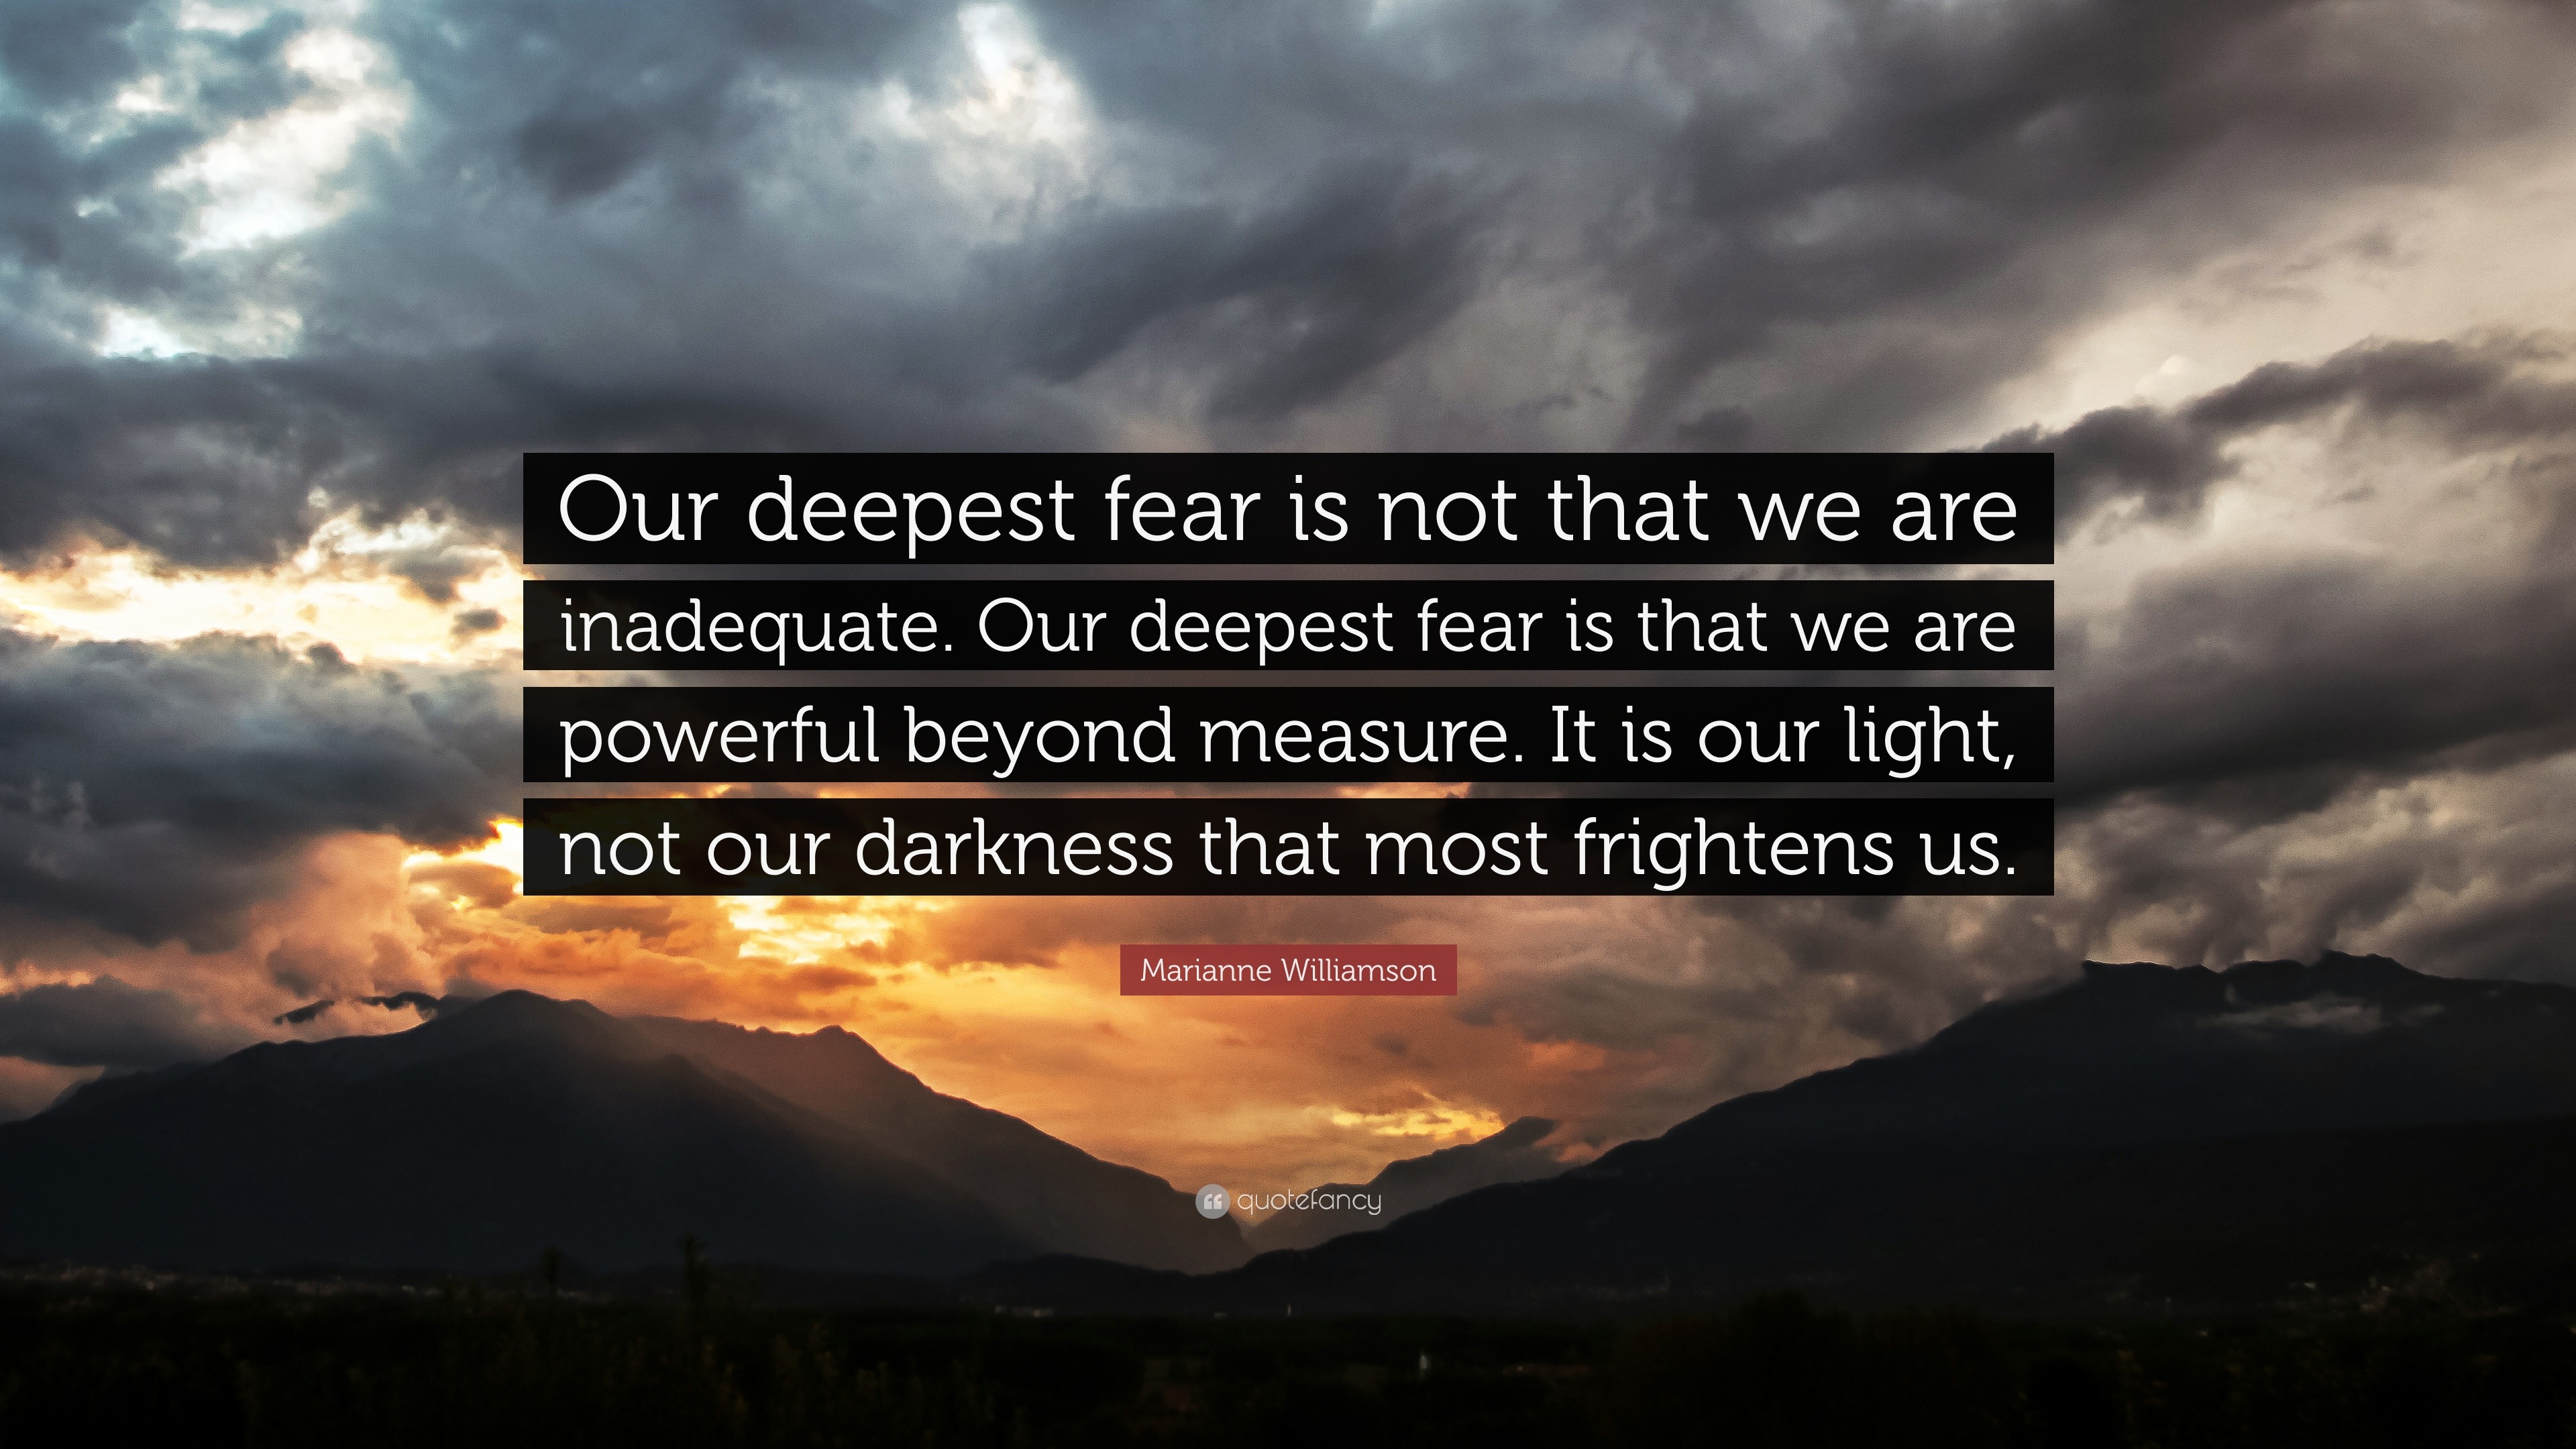 Williamson Quote: “Our deepest fear is not that we are inadequate. Our deepest fear is that we are powerful beyond measure. is our light...”